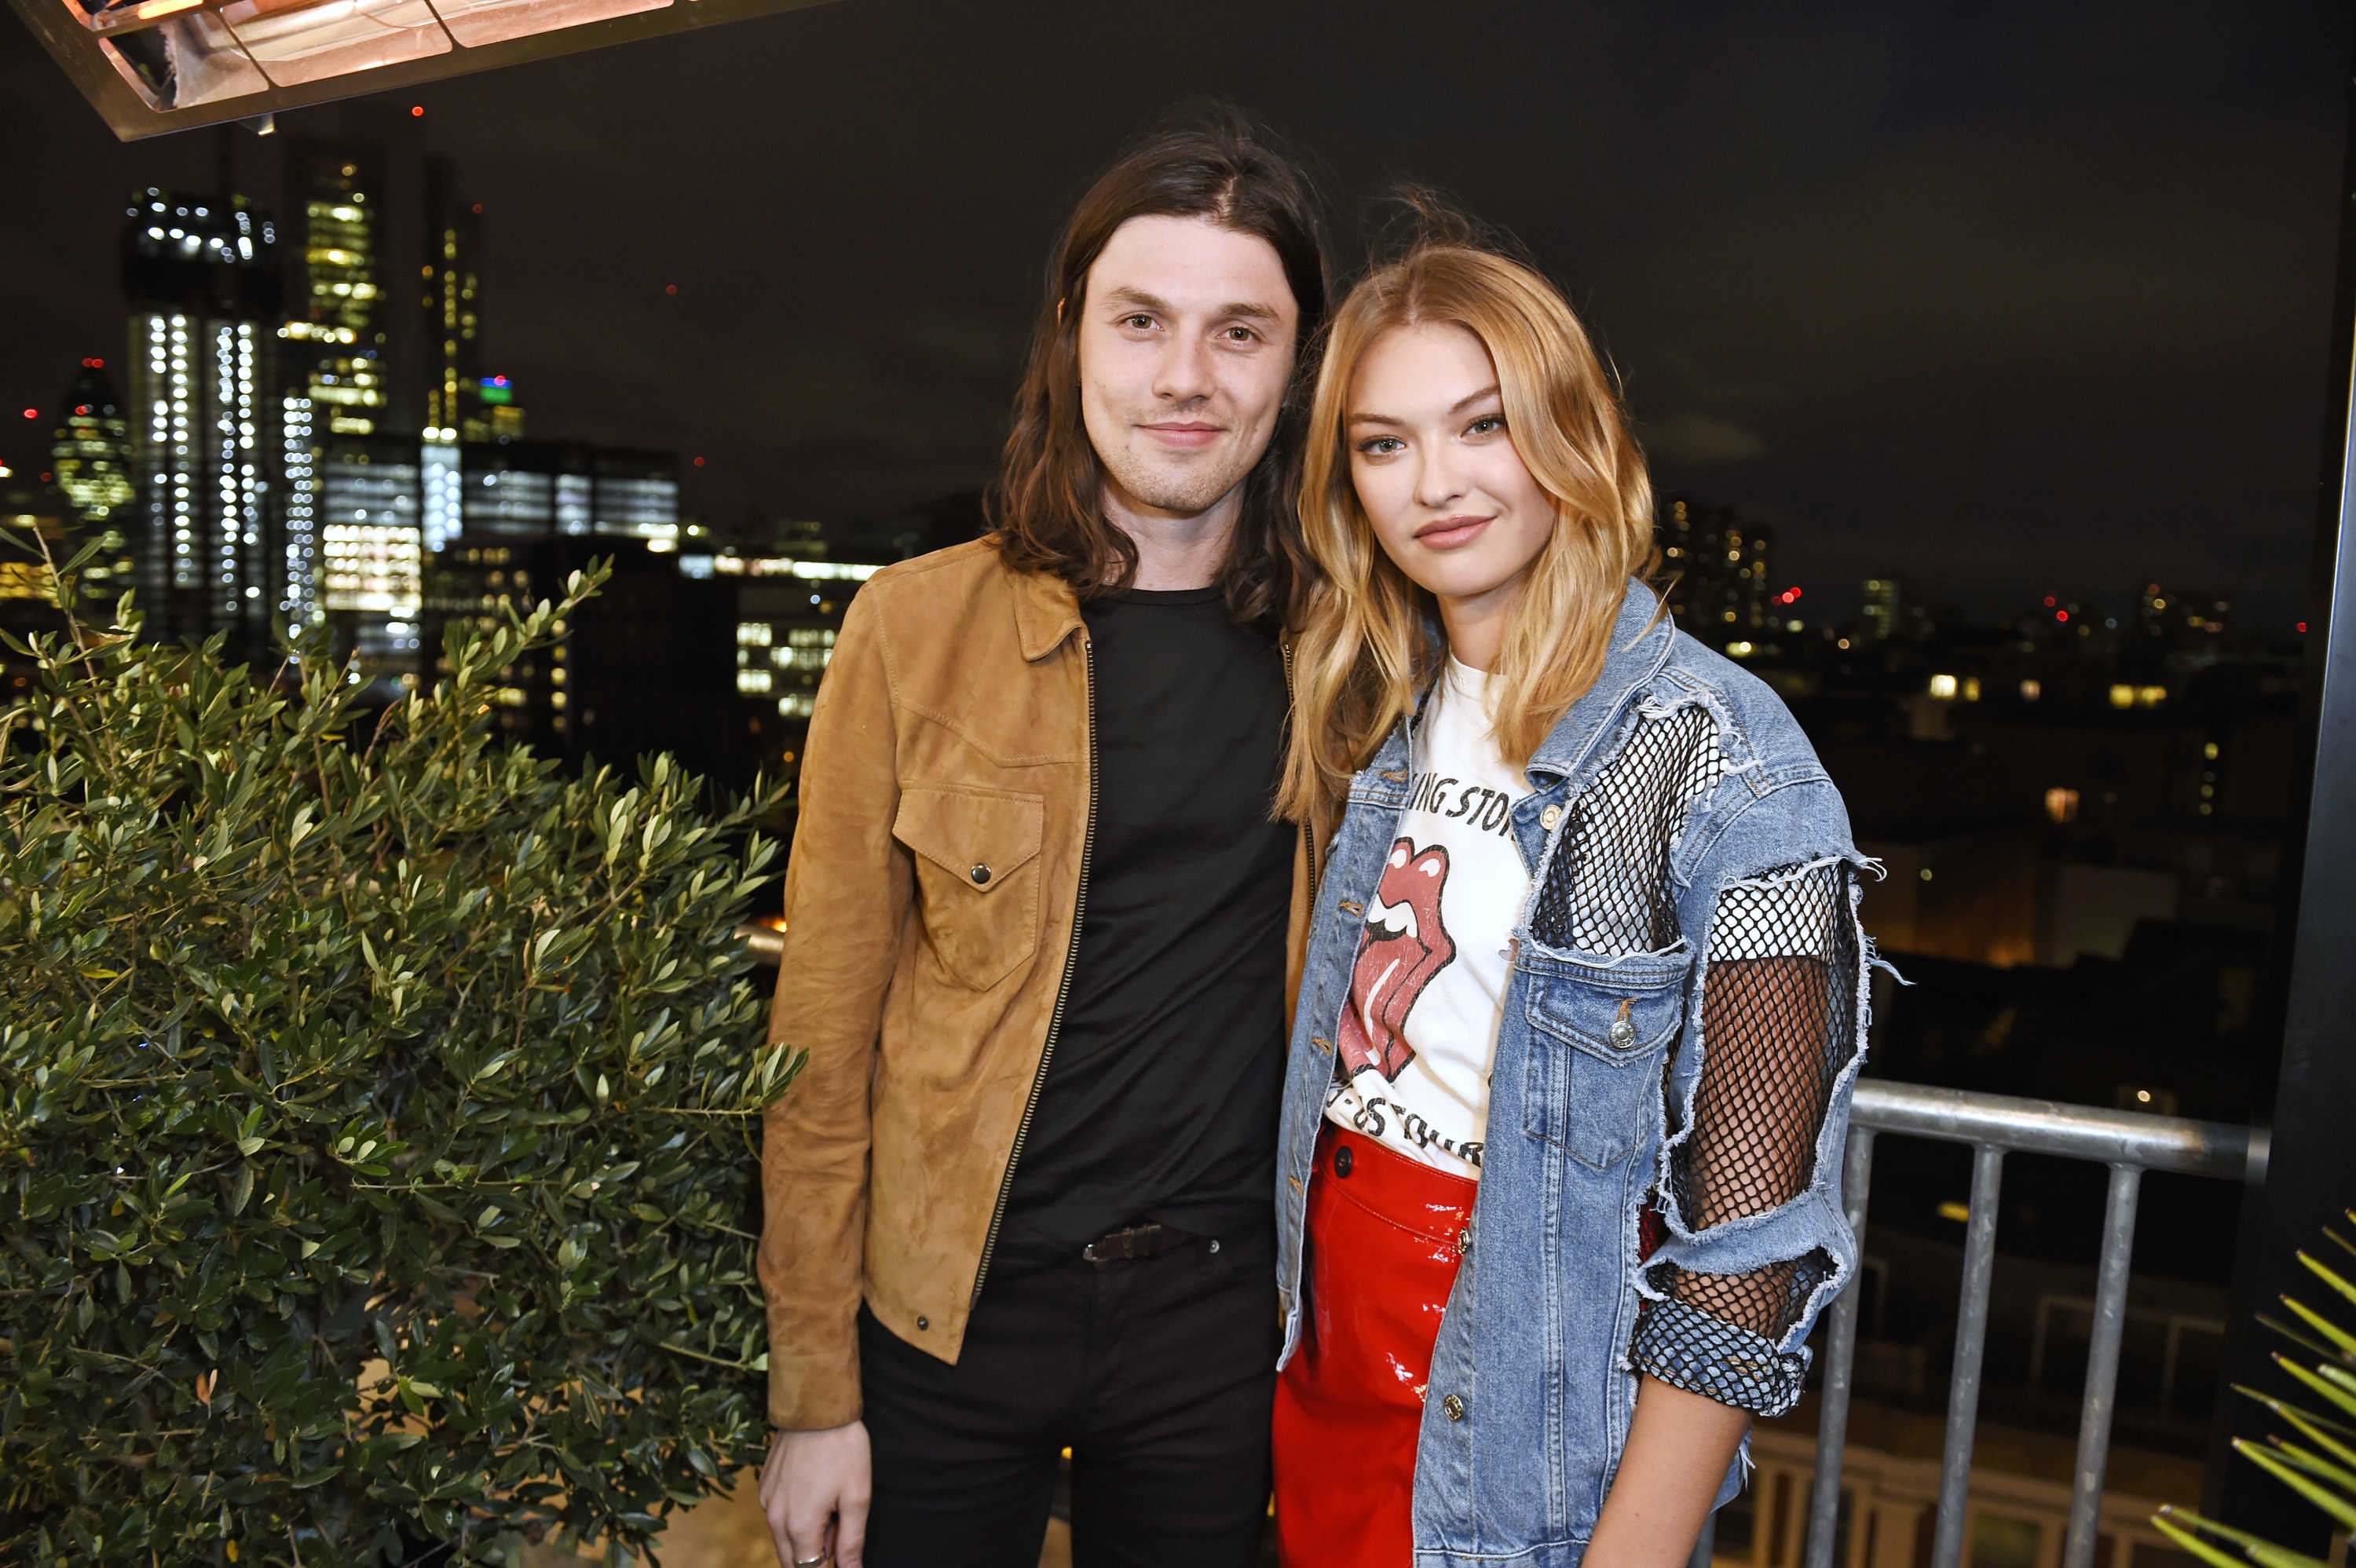 India Gants attends the James Bay x TOPMAN launch party